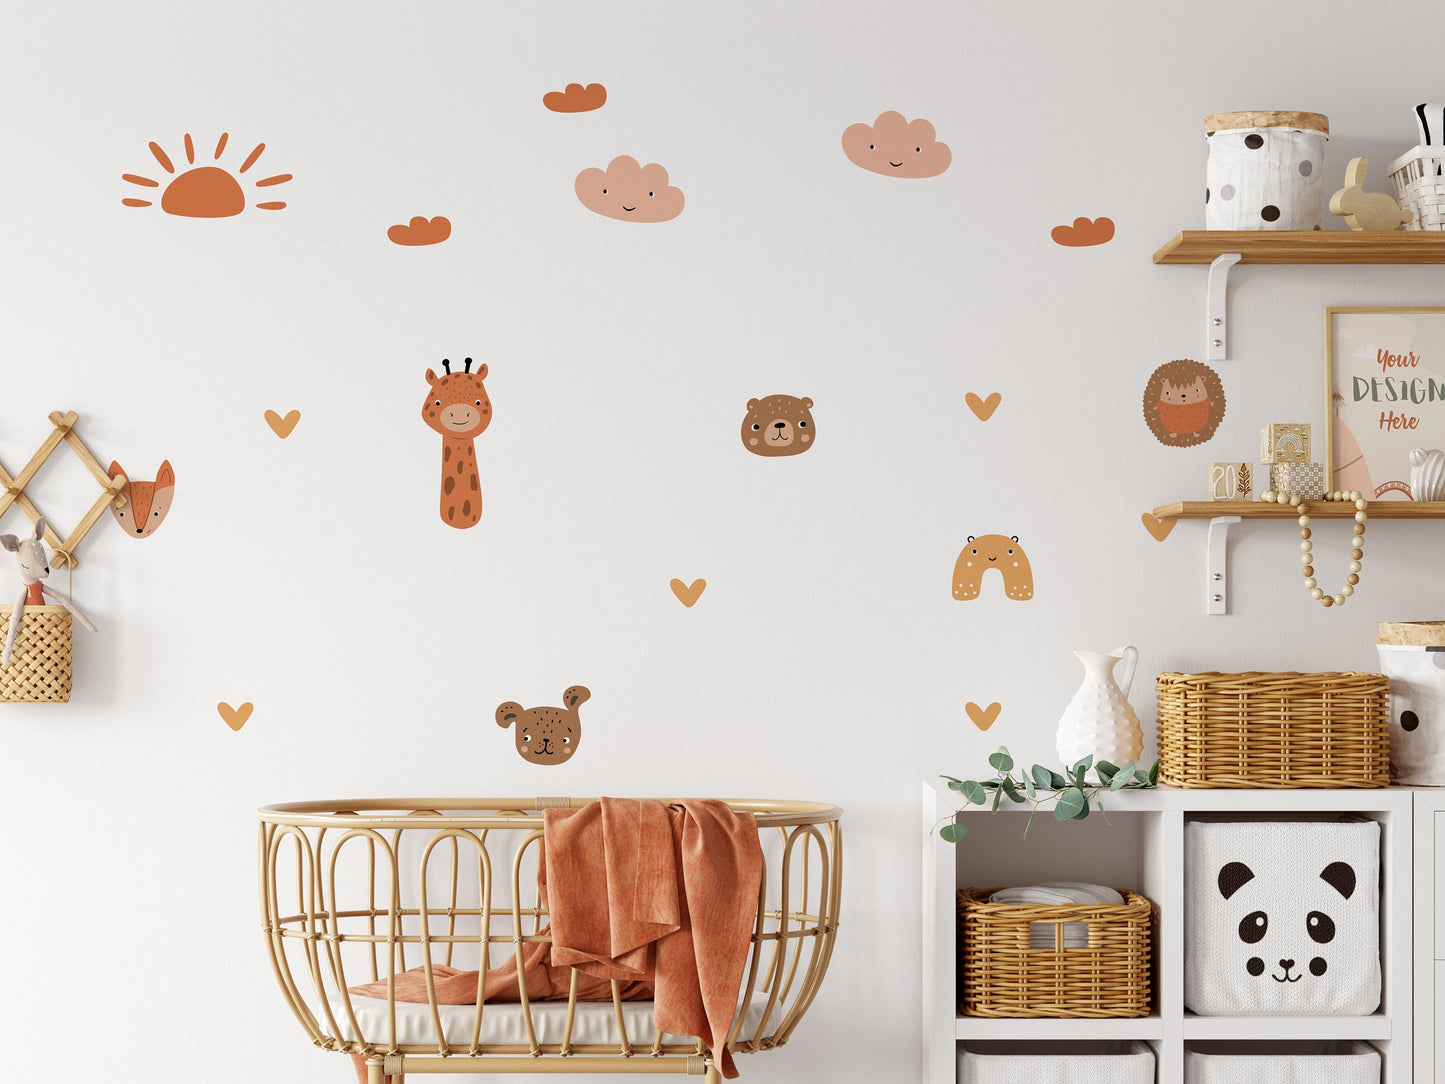 Boho Chic Animal Wall Stickers Decals For Nursery Kids Room Boho Decor Chic Decor For Baby Bedroom